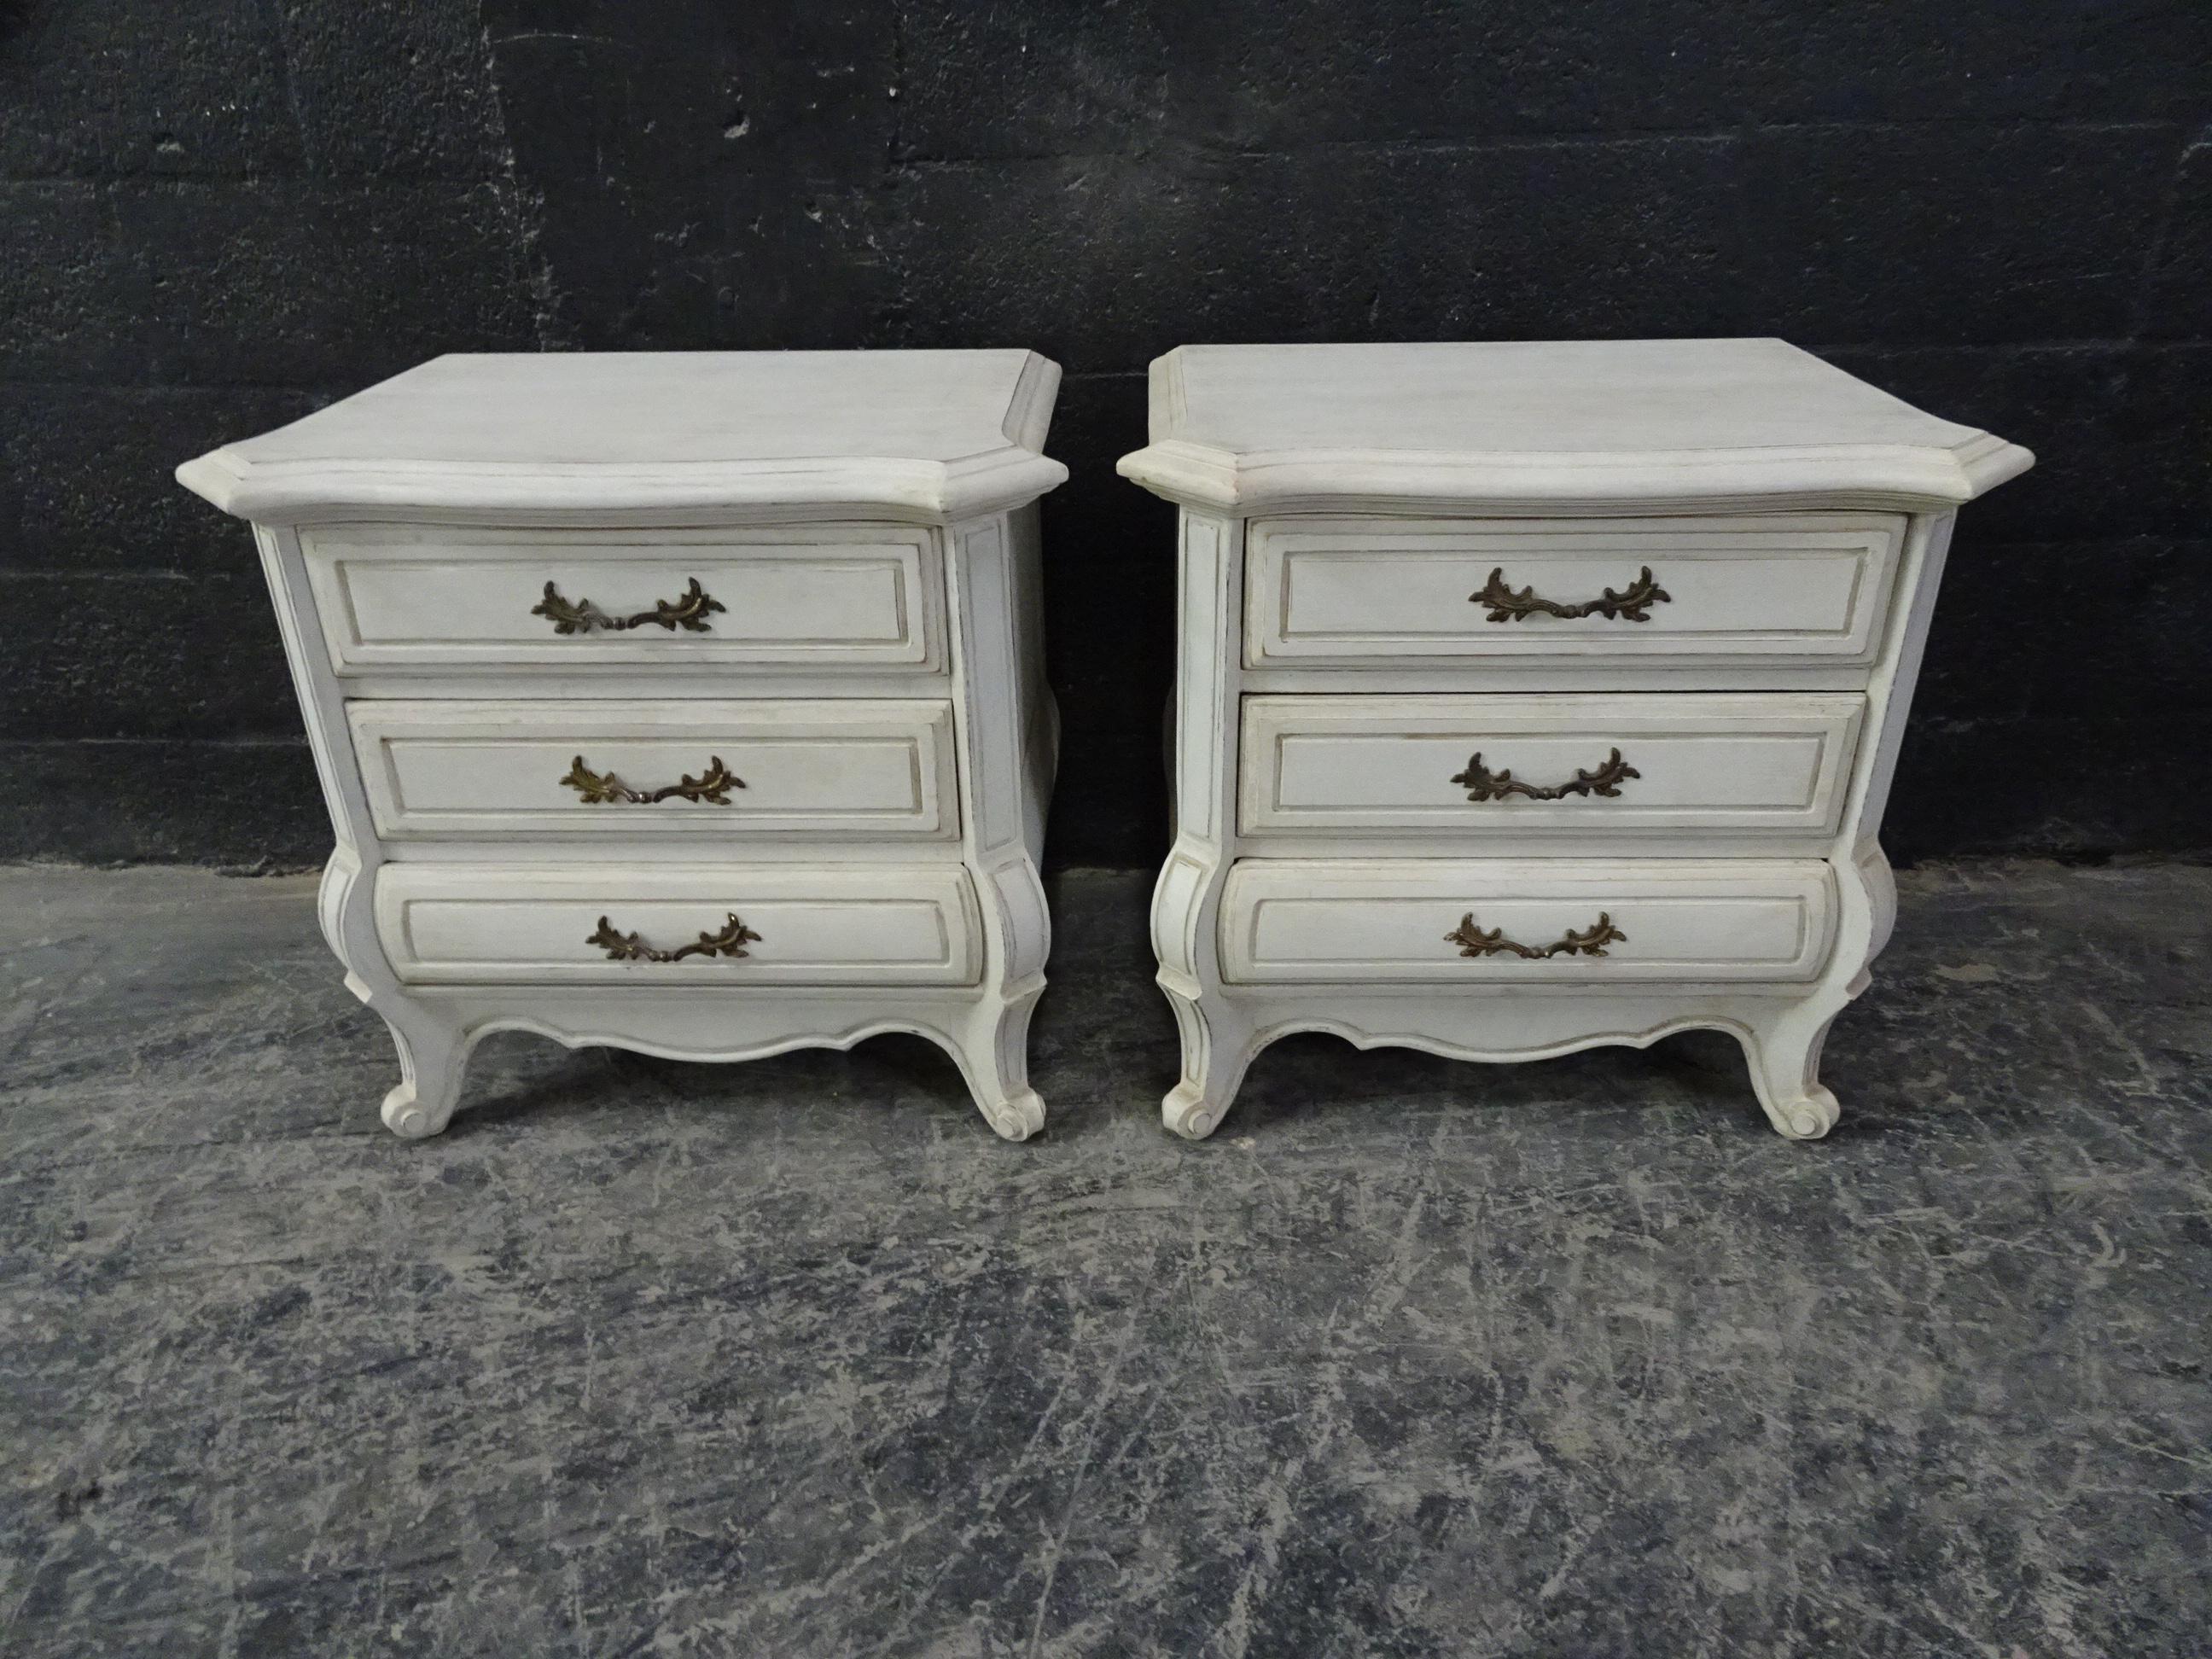 This is a set of 2 Rococo style nightstands. They have been restored and repainted with milk pints 